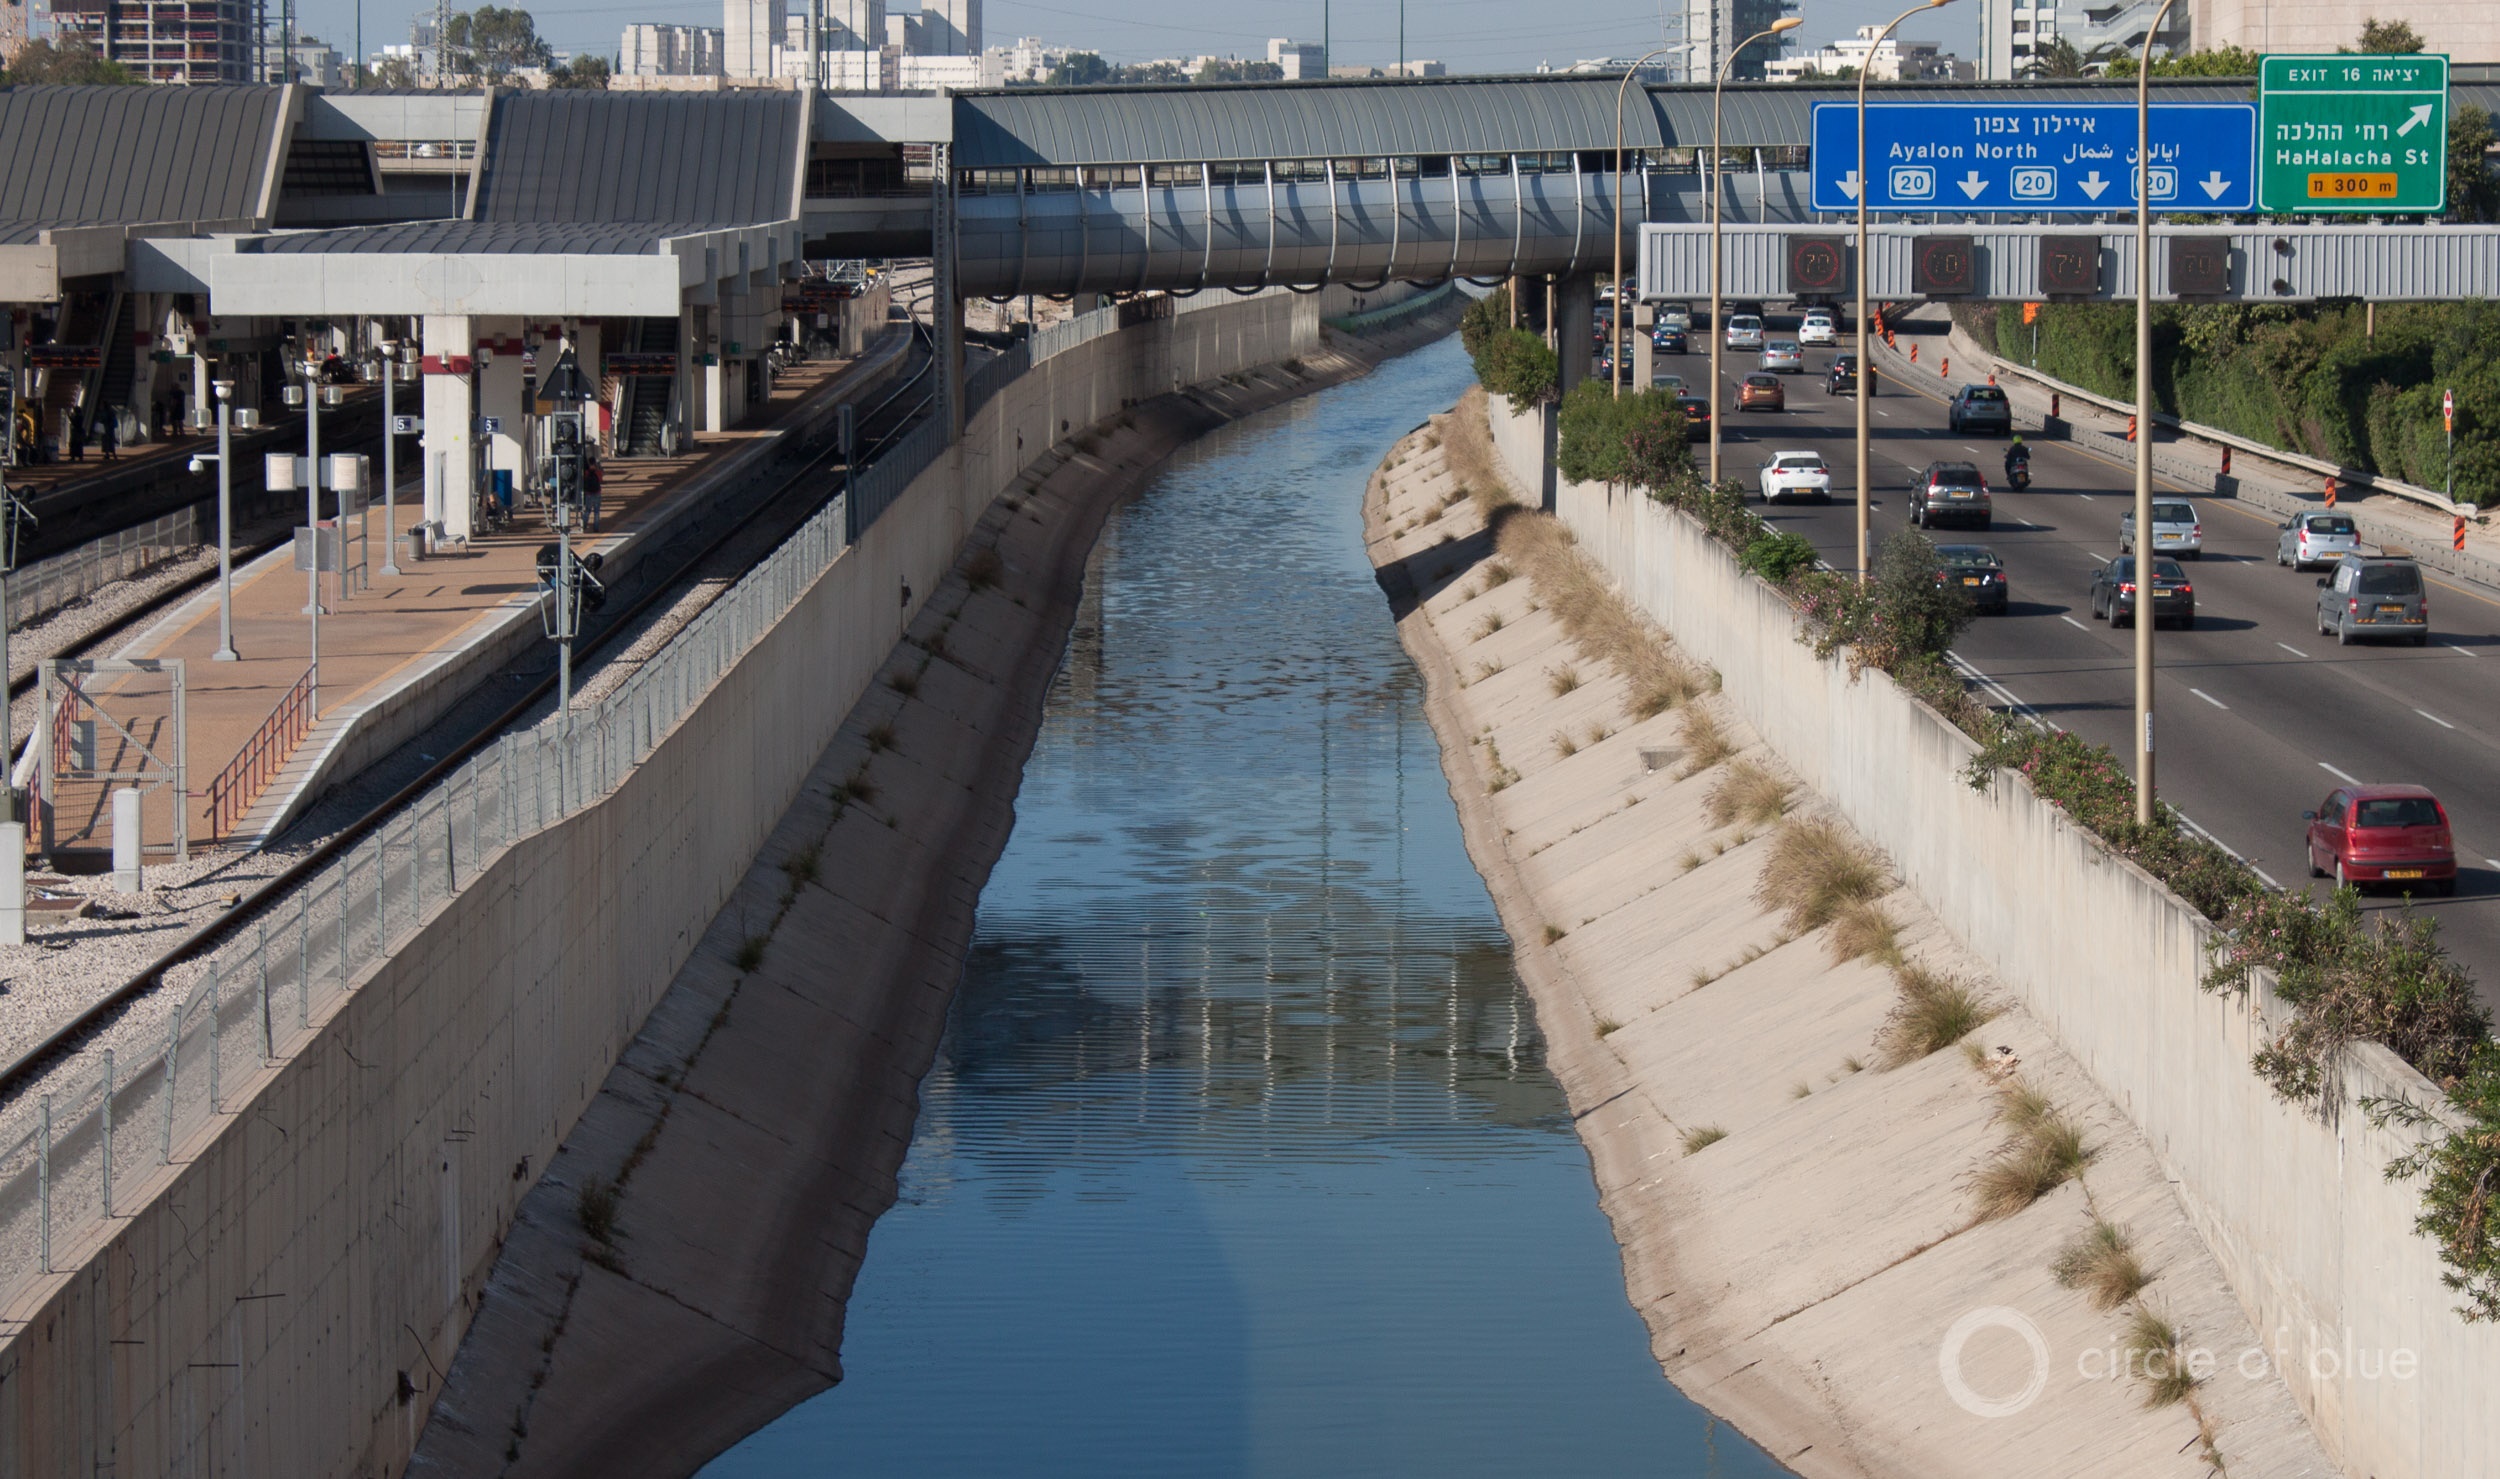 A half century ago, Israel built canals to move water from the Jordan River to the coasts. Today, desalination plants send freshwater inland. Photo © Brett Walton / Circle of Blue